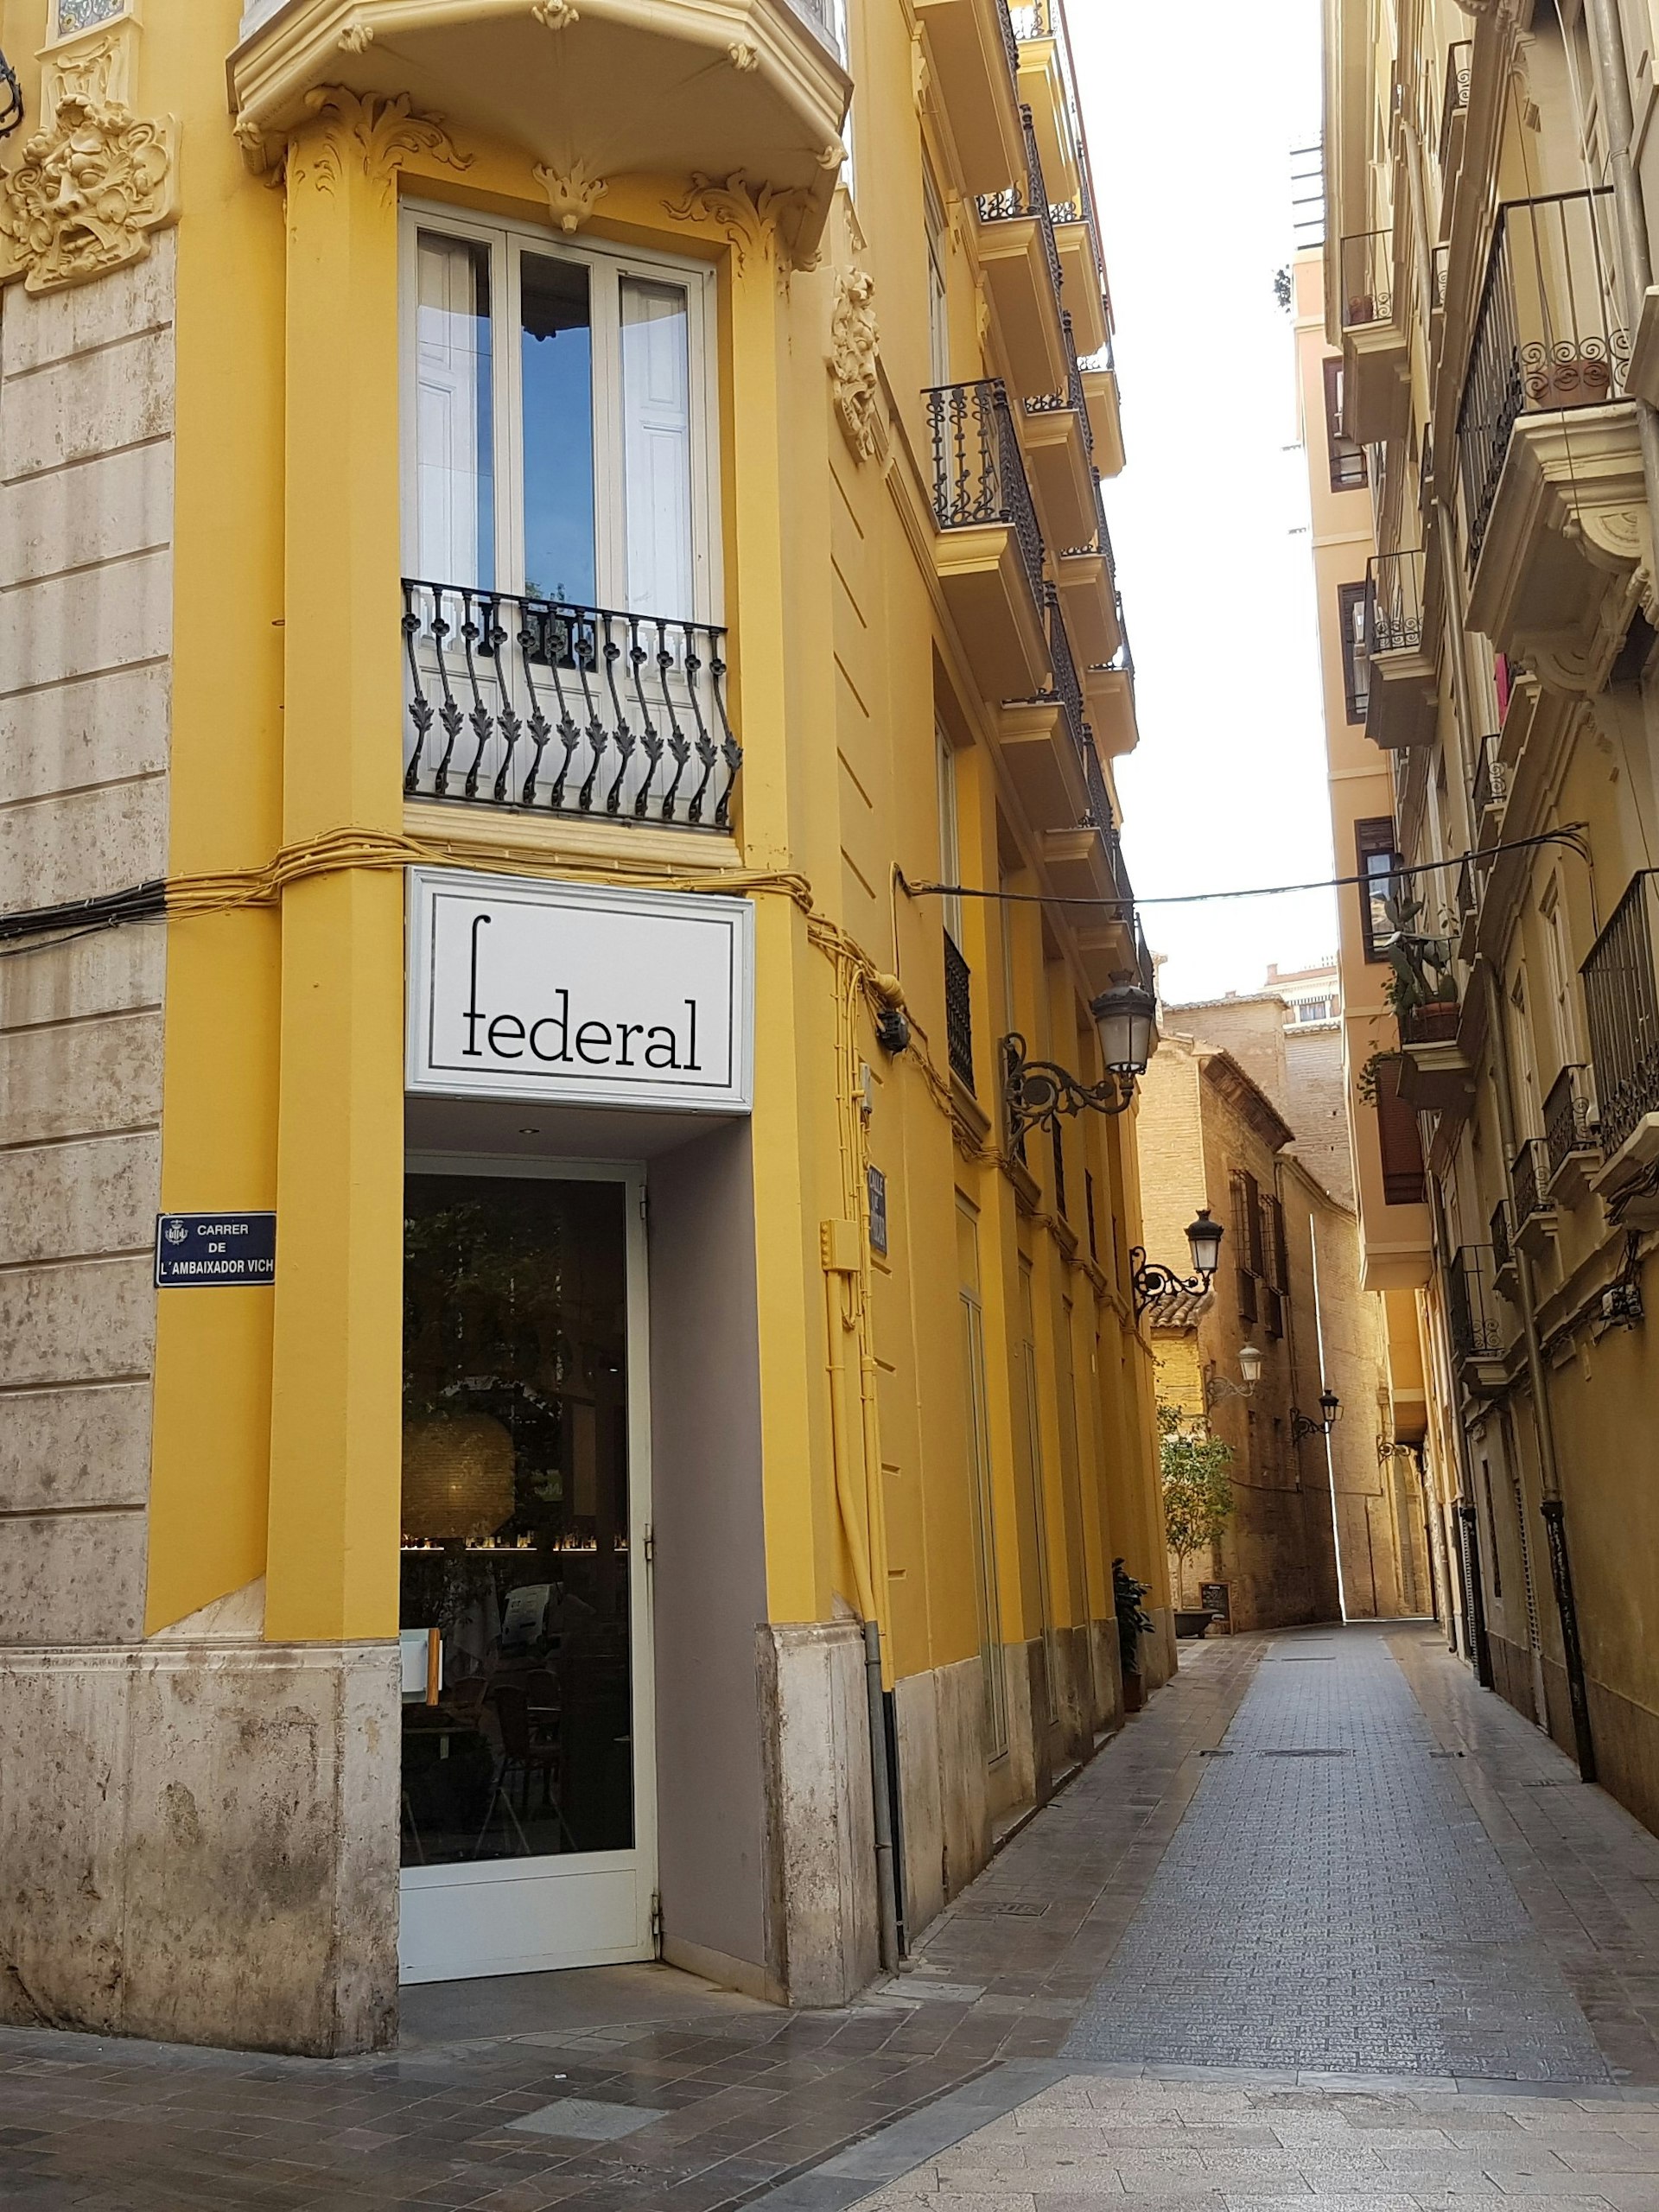 Housed in a historic building, Federal is one of Valencia's coolest cafes